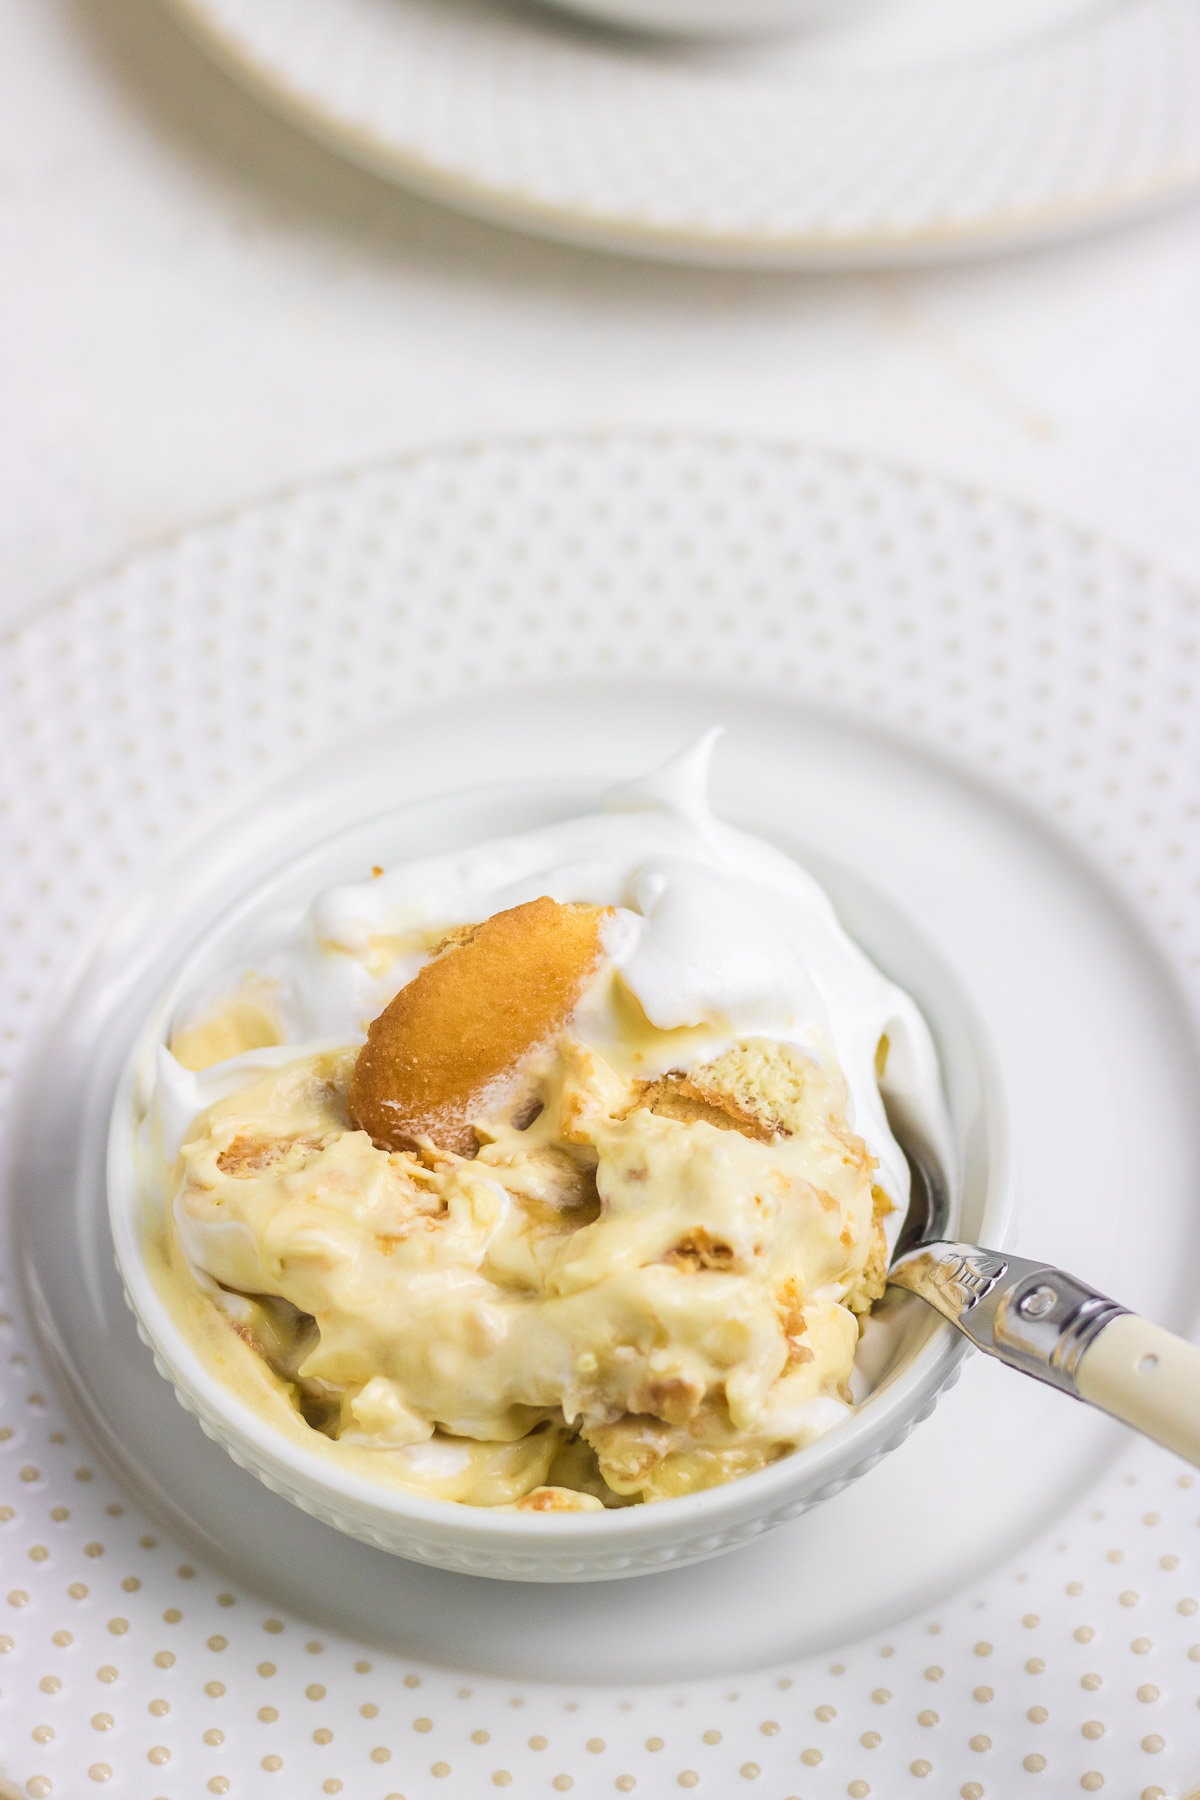 A small bowl of Southern banana pudding with a spoon.